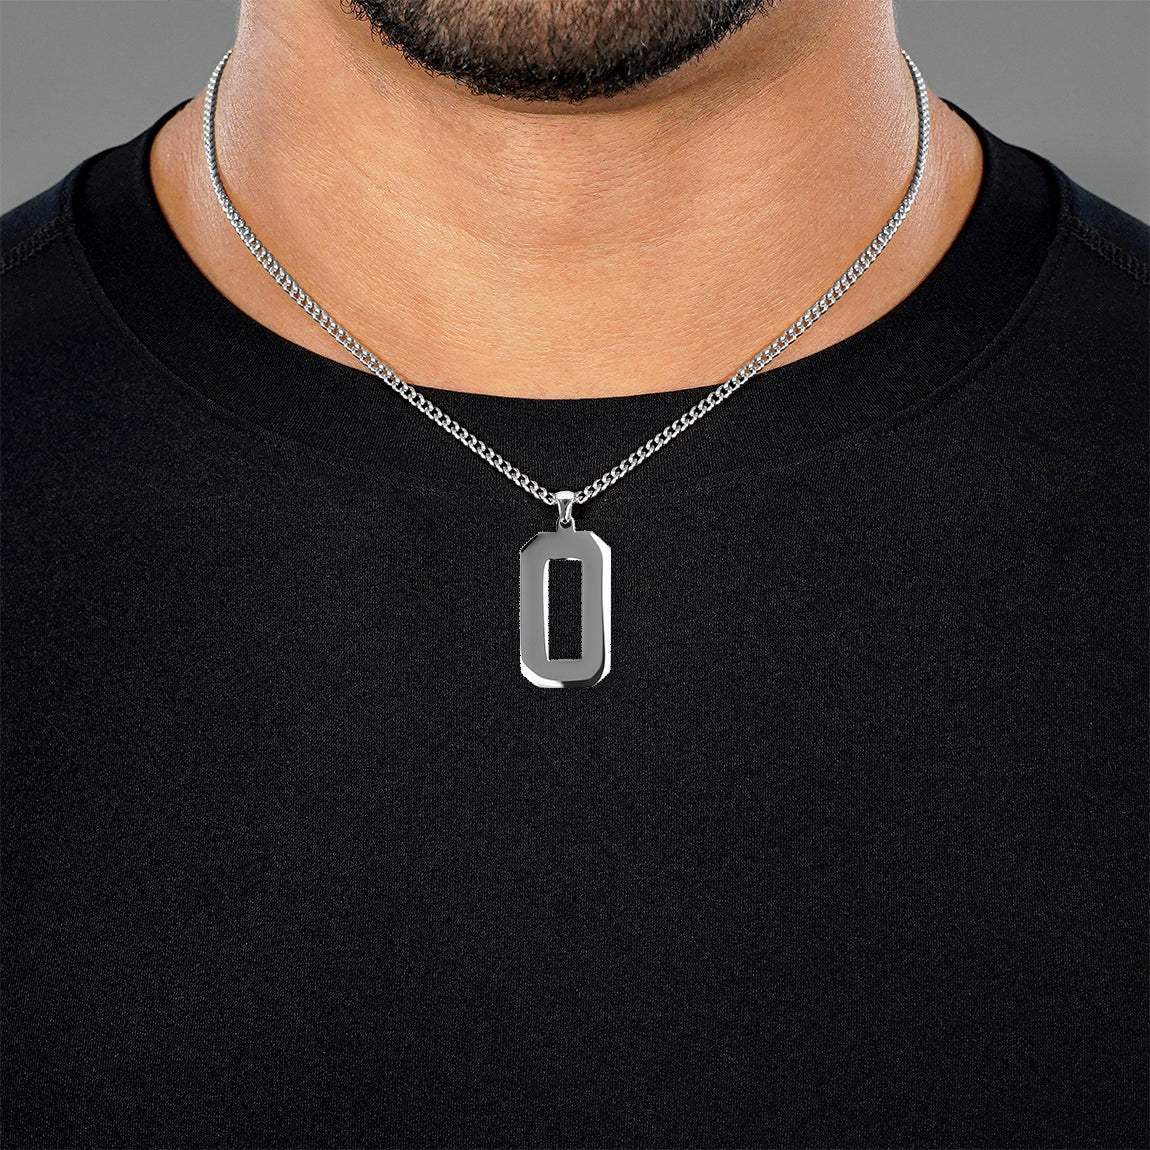 O Letter Pendant with Chain Necklace - Stainless Steel